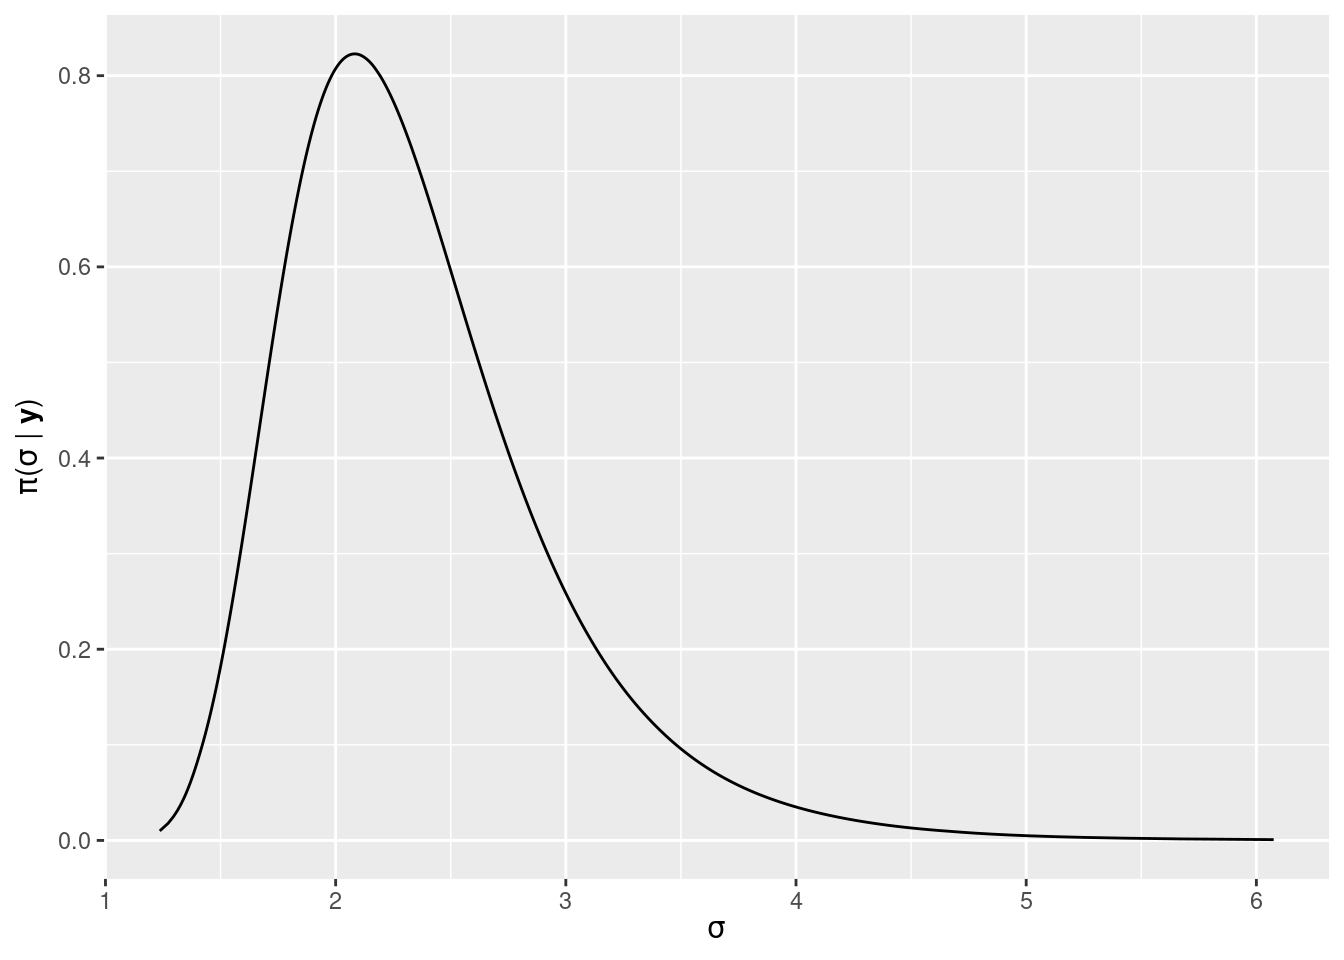 Posterior marginal of the standard deviation of the Gaussian likelihood in the linear model fit to the cement dataset.